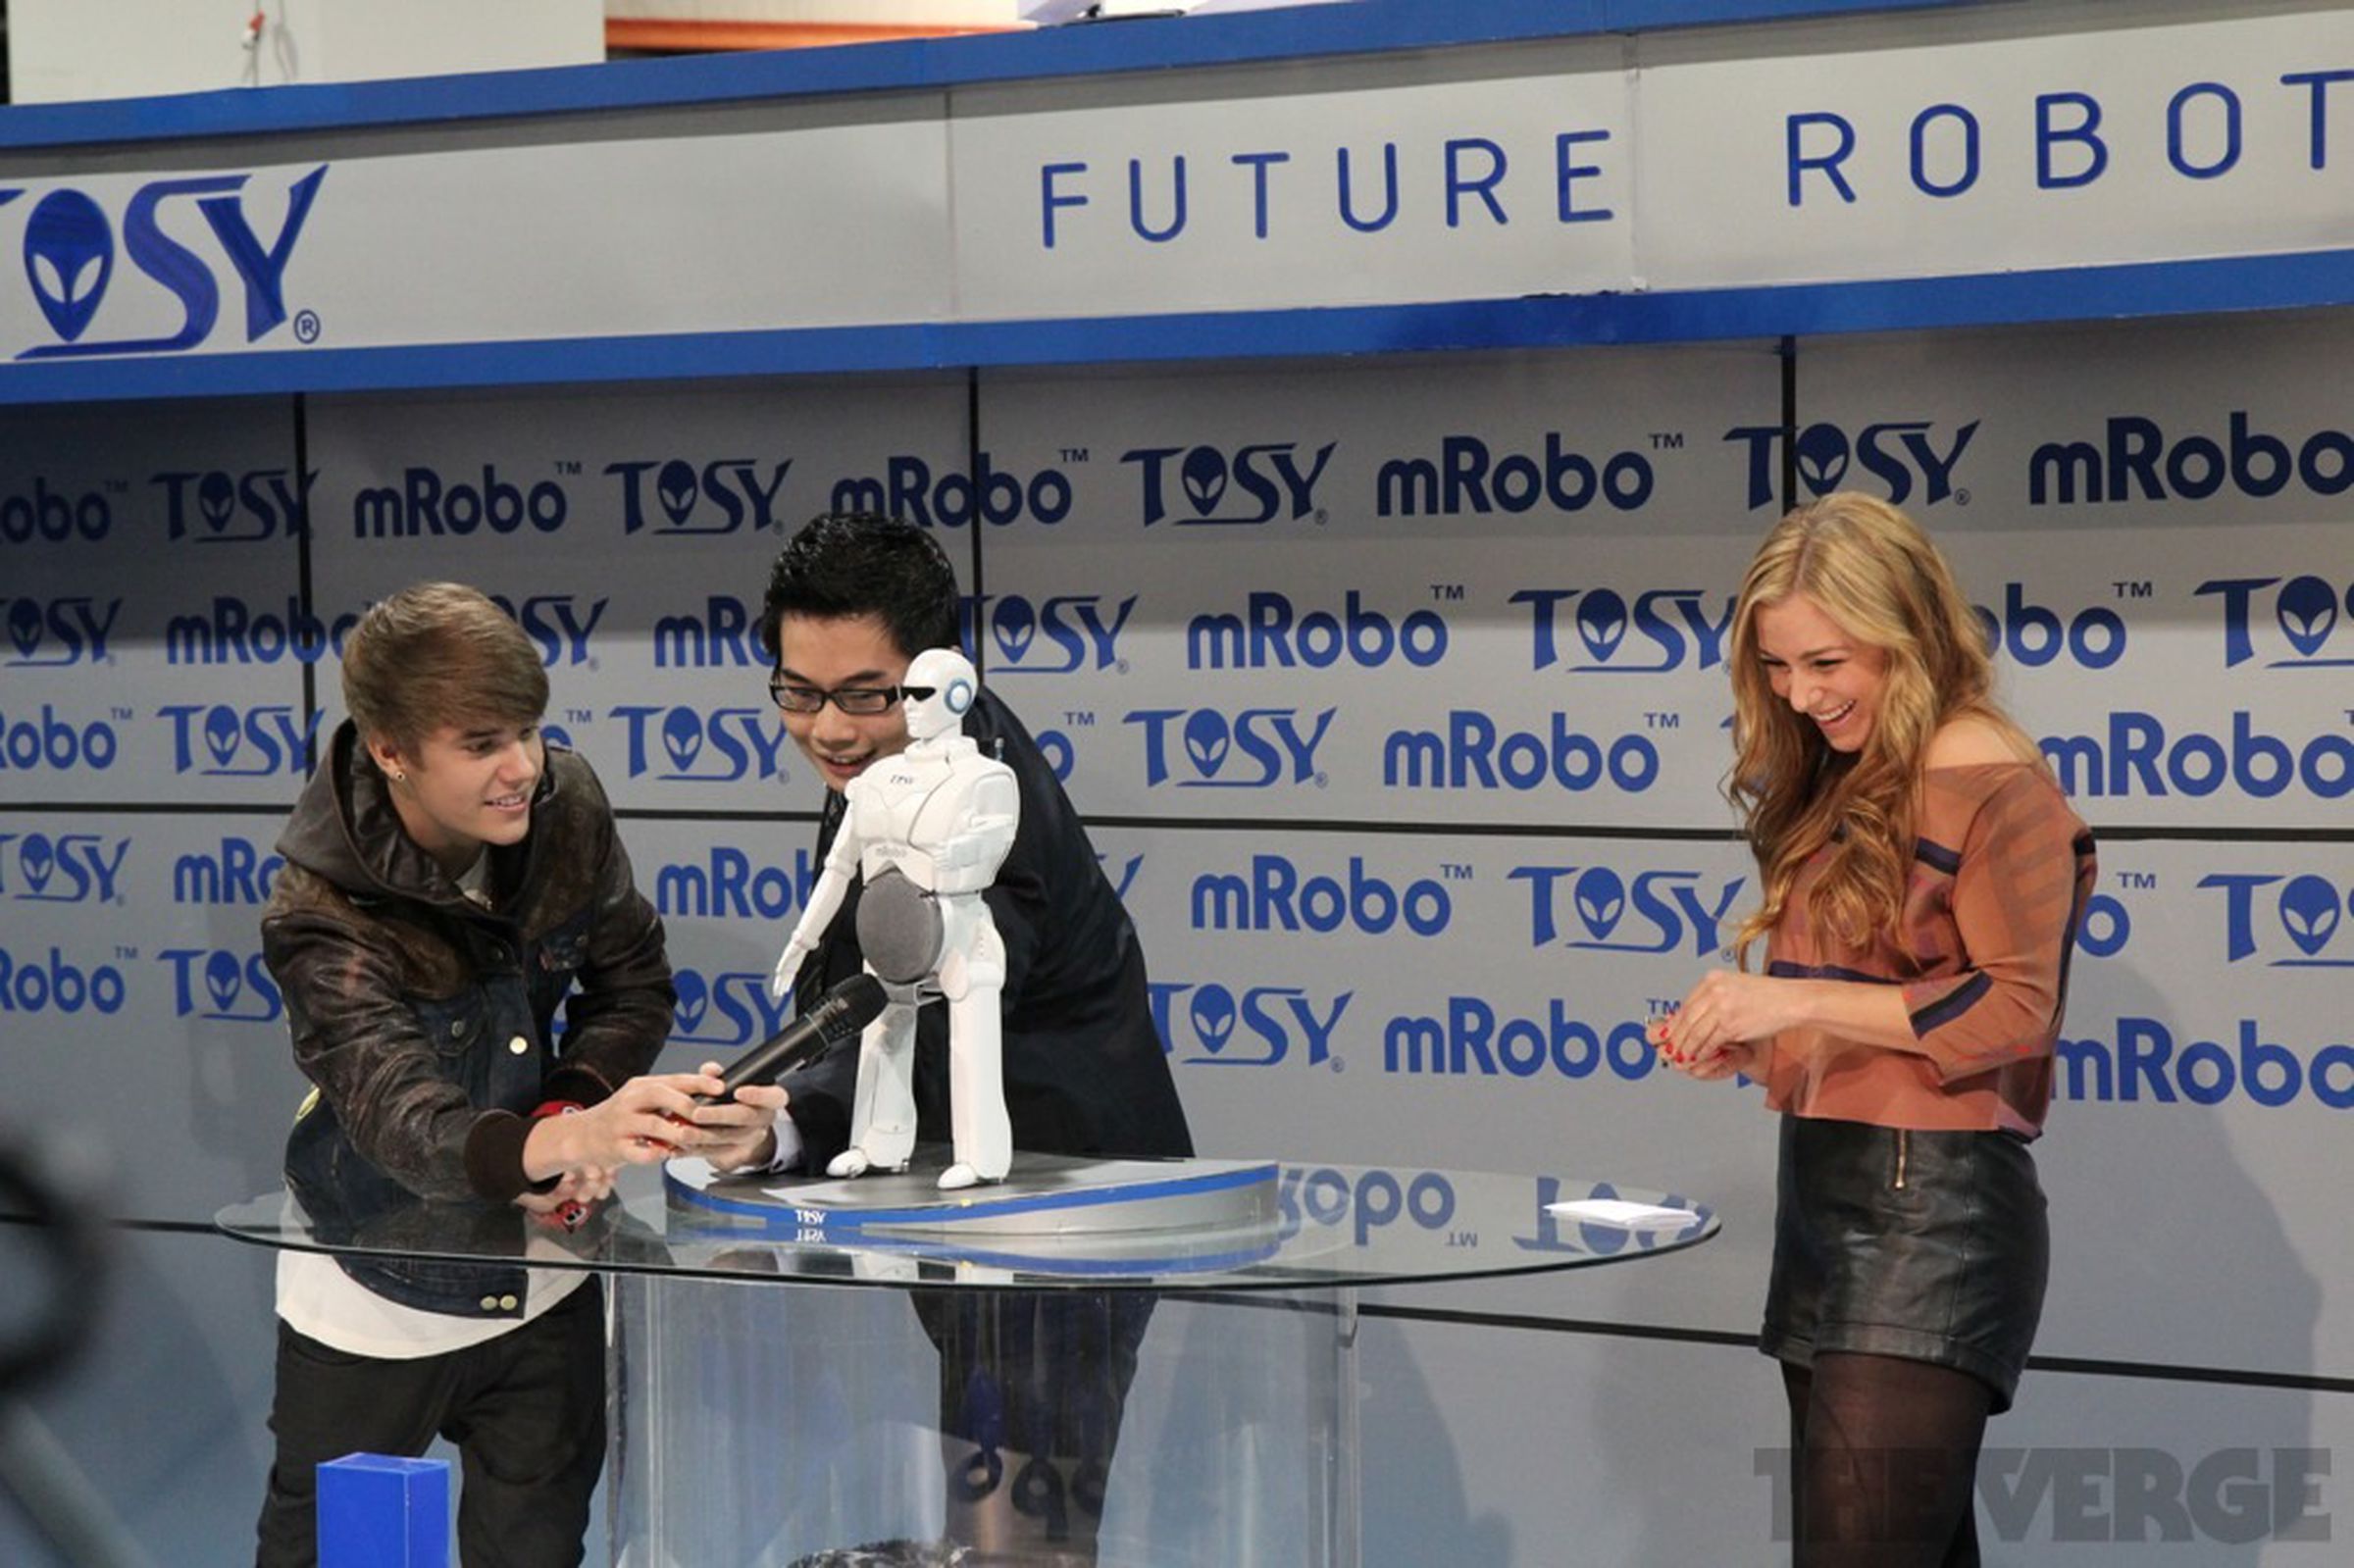 TOSY mRobo (Bieber bot) prototype with Justin Bieber press conference pictures